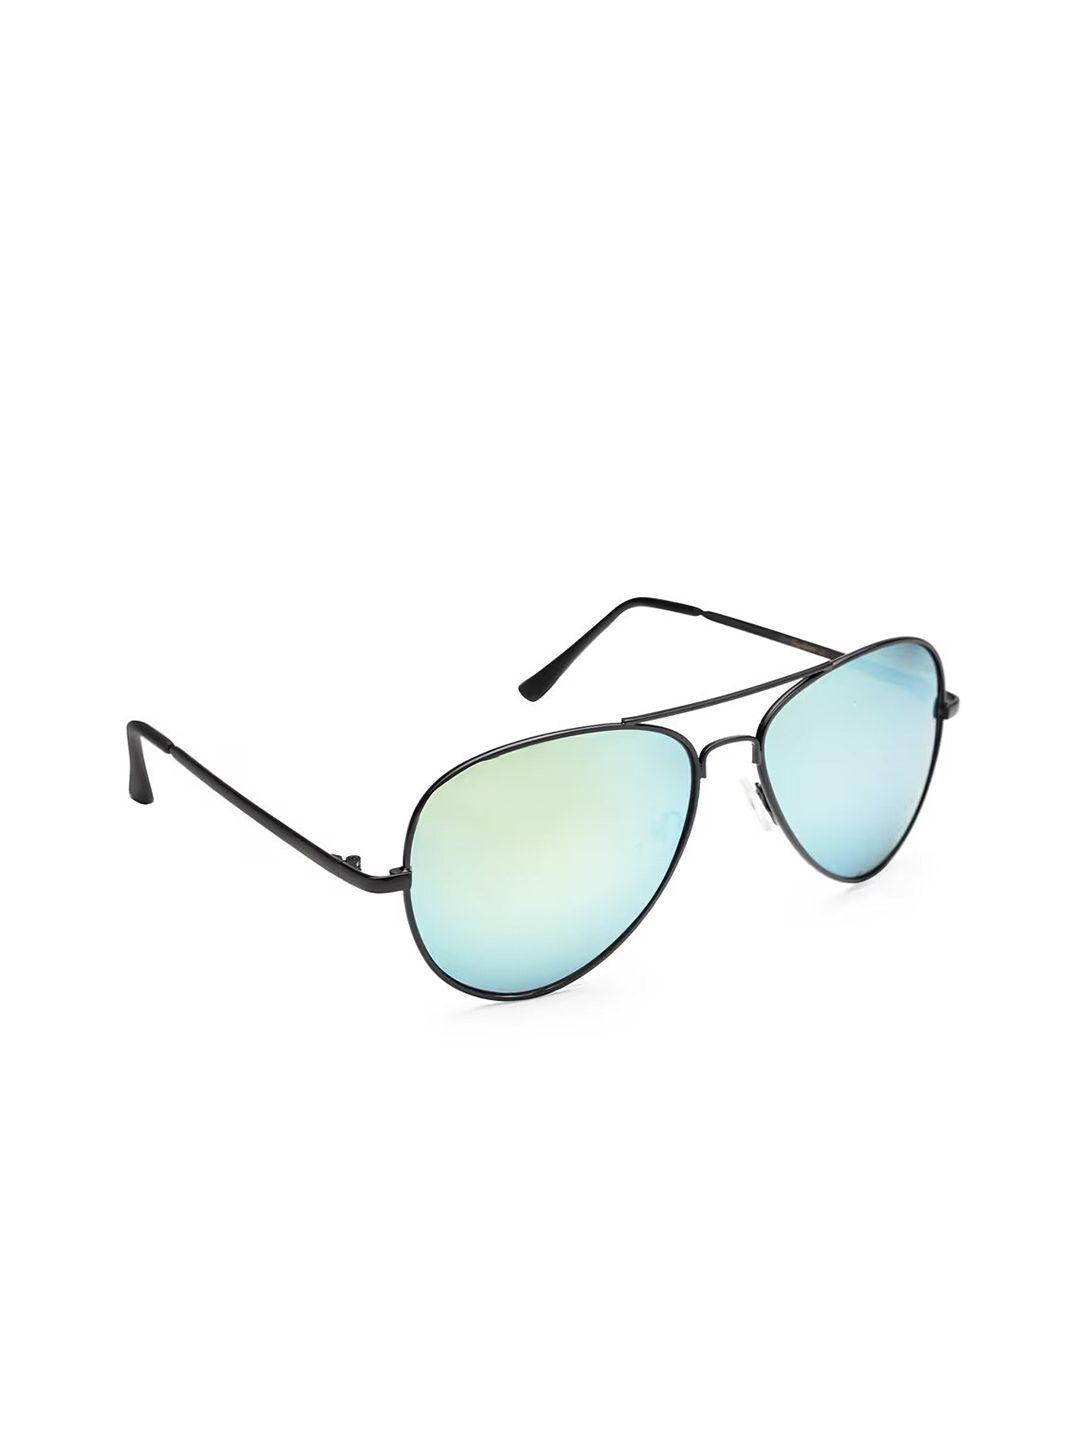 pepe-jeans-lens-&-aviator-sunglasses-with-uv-protected-lens-pj_5111c1_s3